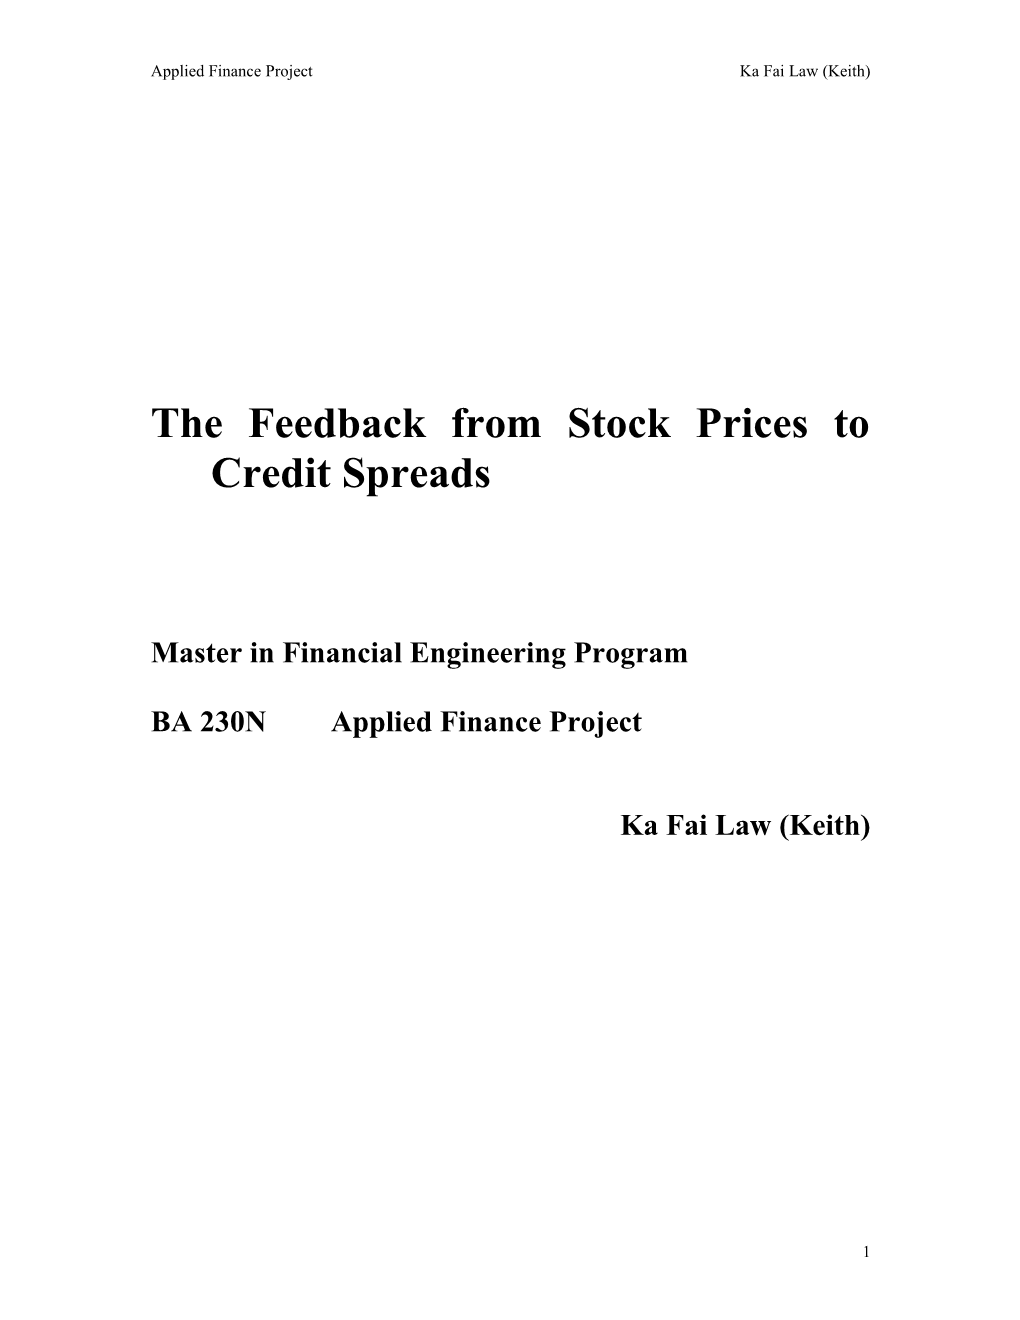 The Feedback from Stock Prices to Credit Spreads